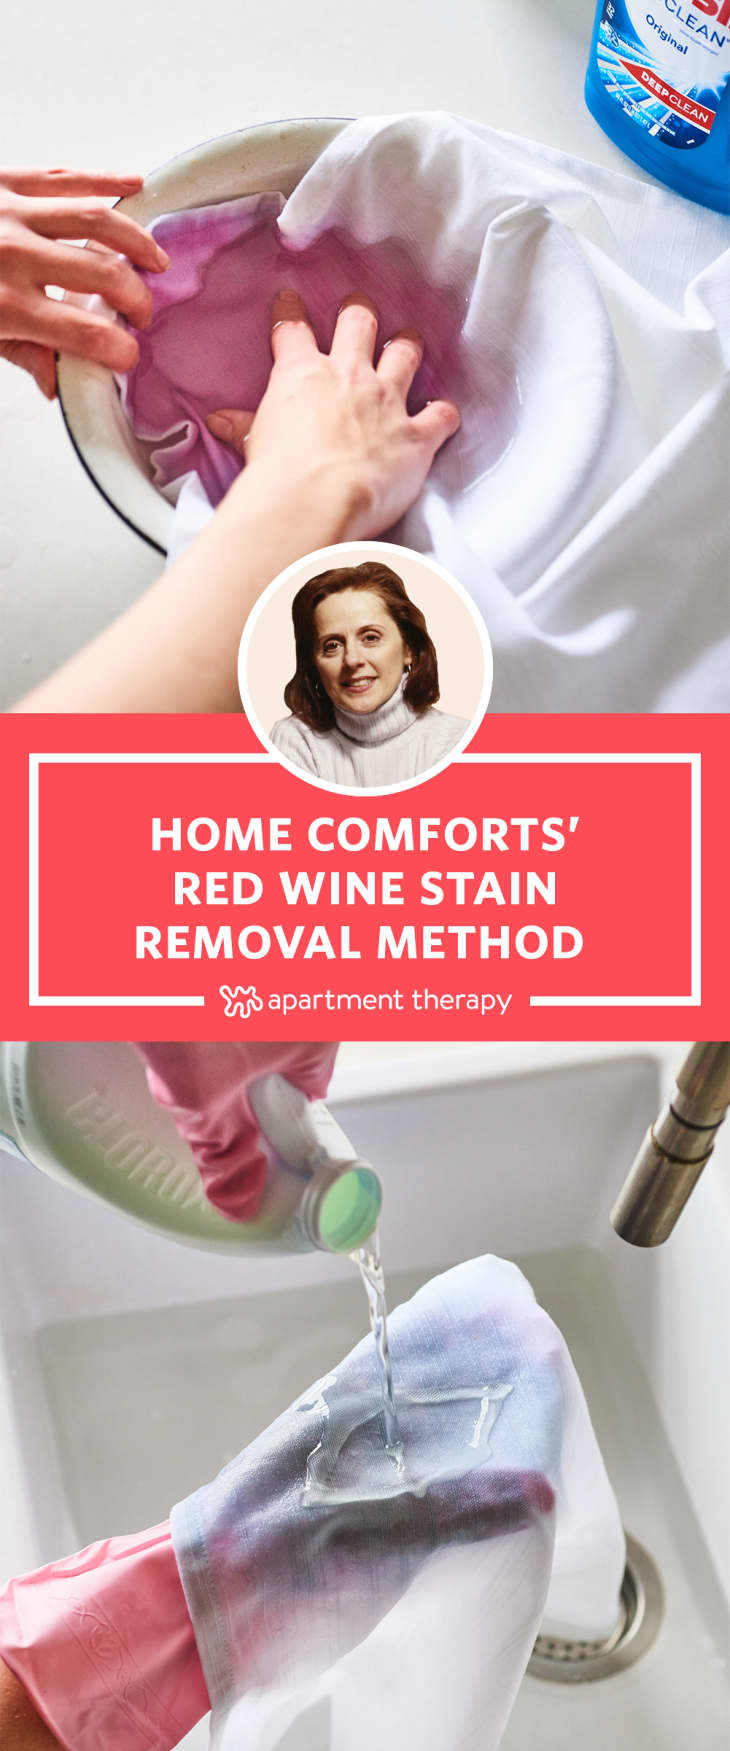 https://cdn.apartmenttherapy.info/image/upload/f_auto,q_auto:eco,w_730/at%2Fart%2Fphoto%2F2019-12%2Fcleaning-showdown-red-wine%2Fred-wine-pin-home-comforts